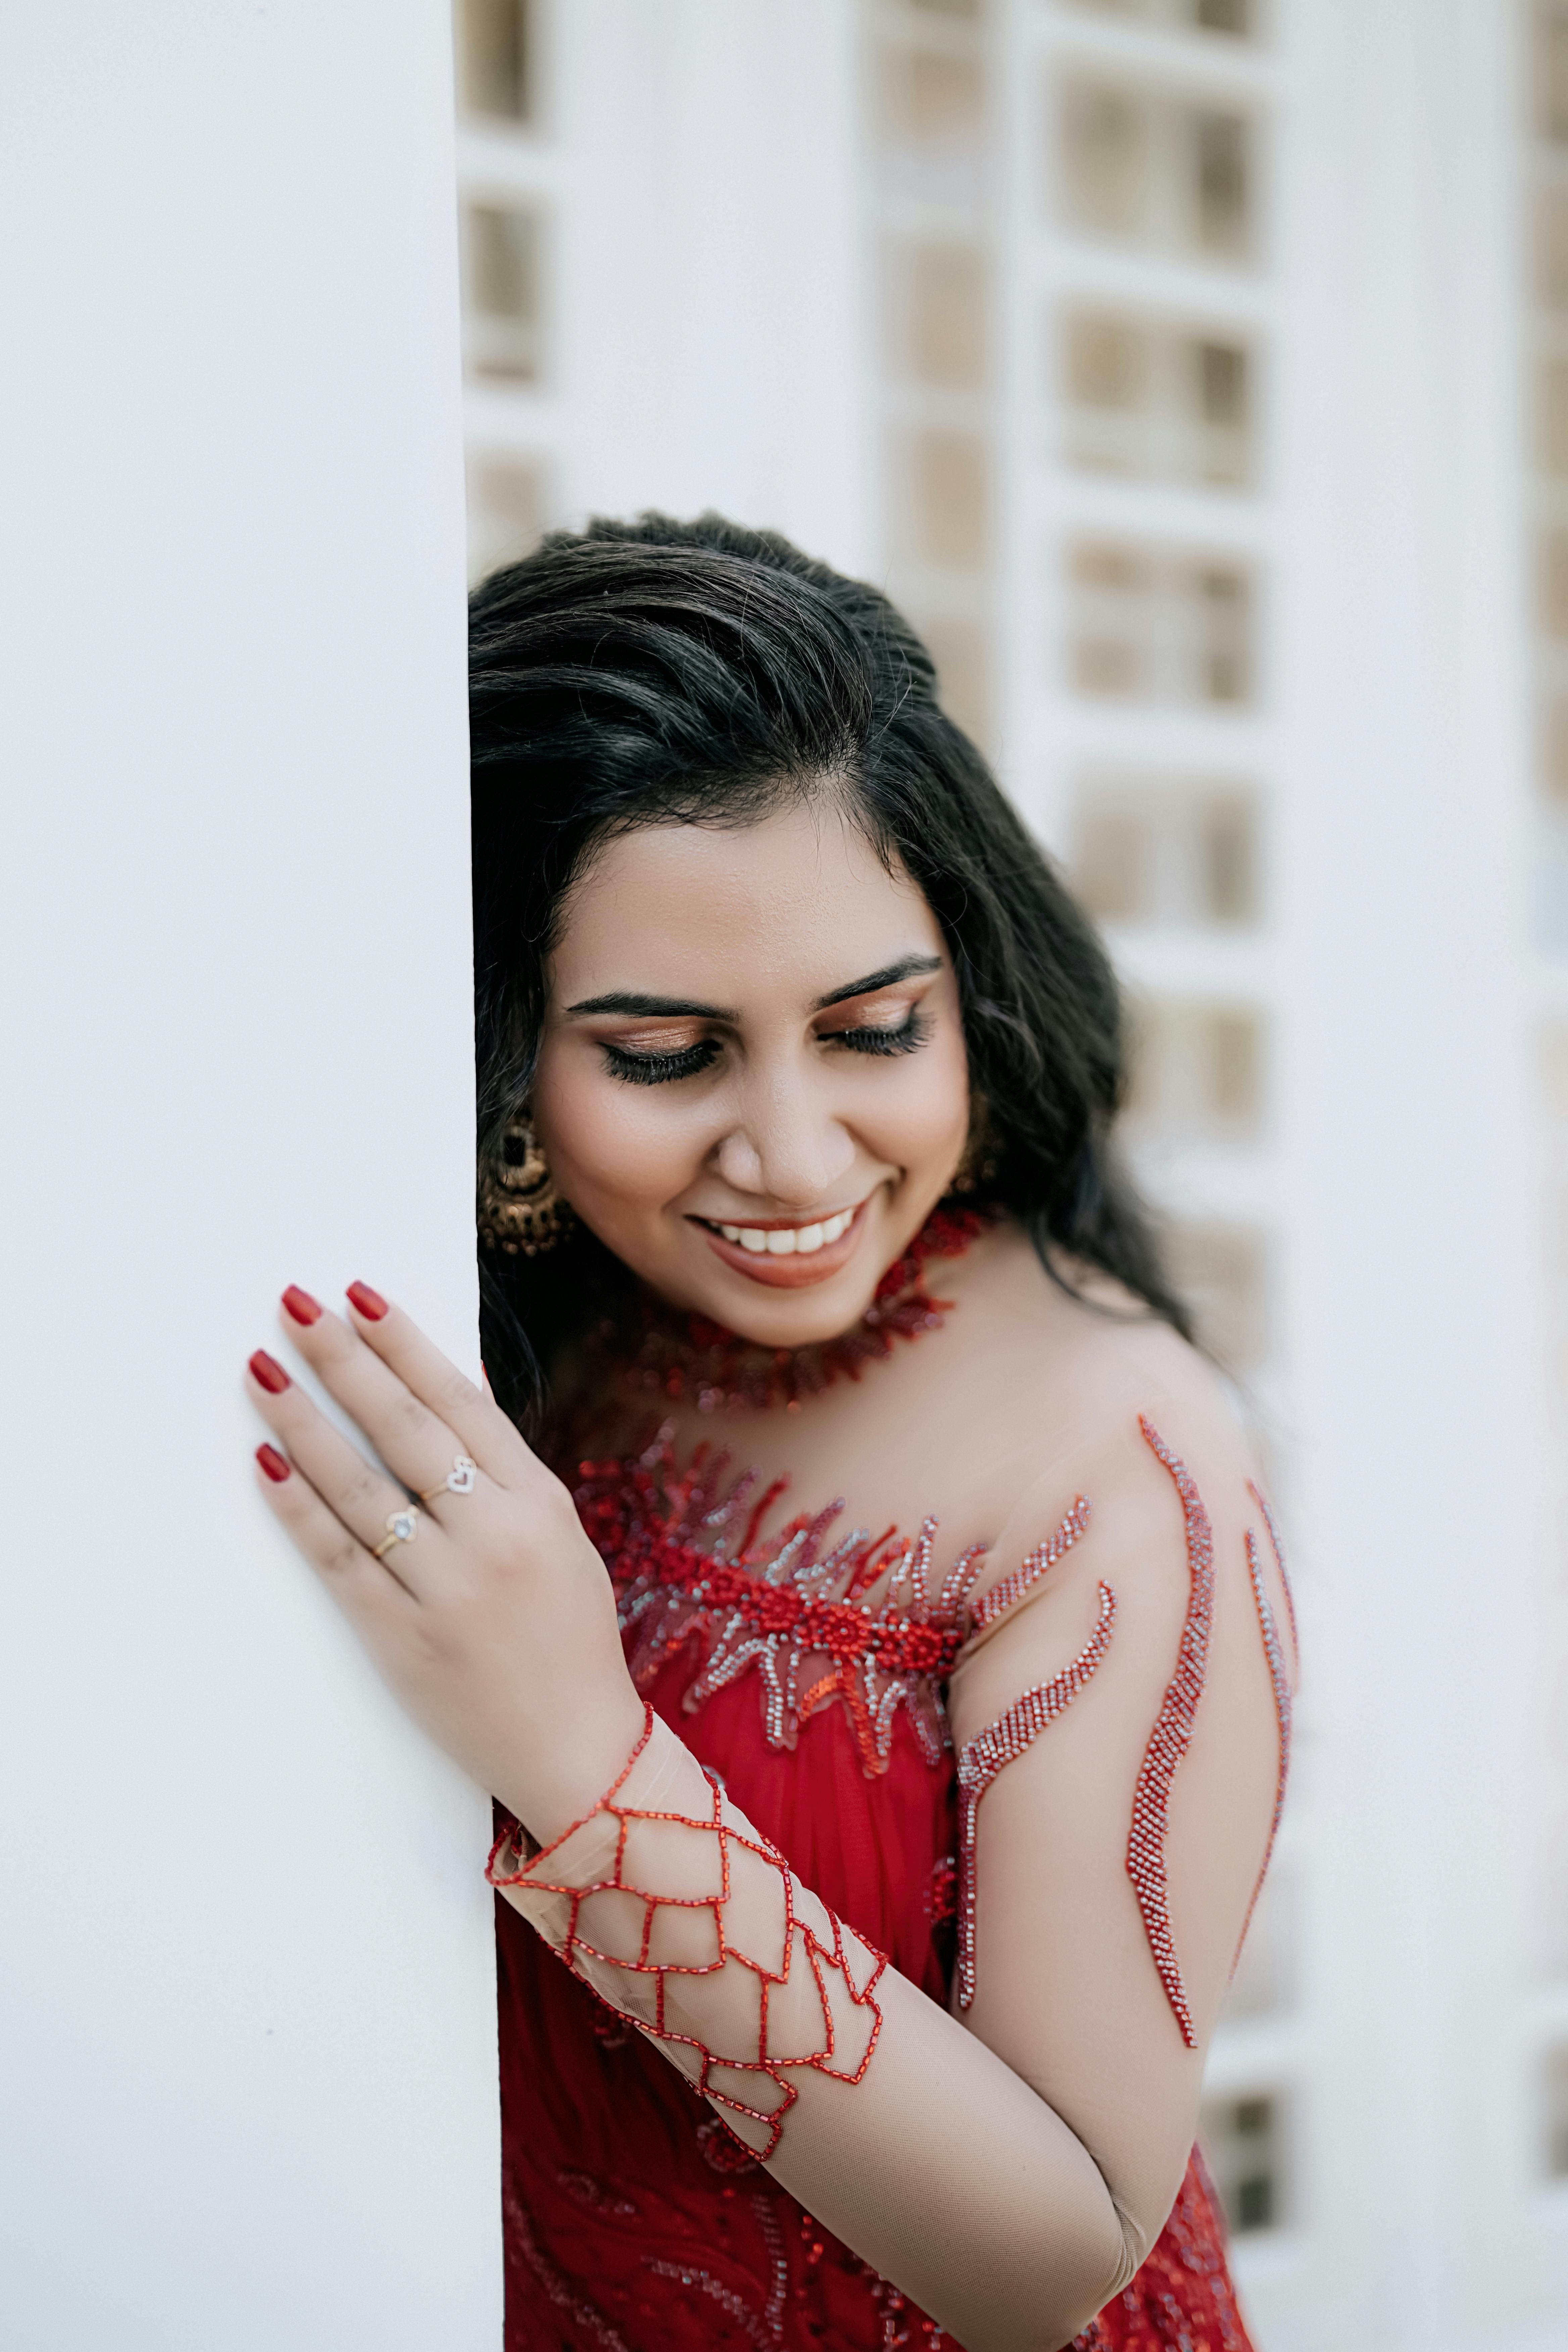 Free Photos - A Woman With Dark Hair Wearing A Stylish Blue Dress, Possibly  An Indian Saree, As She Poses Against A Yellow Wall. Her Expression And Pose  Create An Elegant And